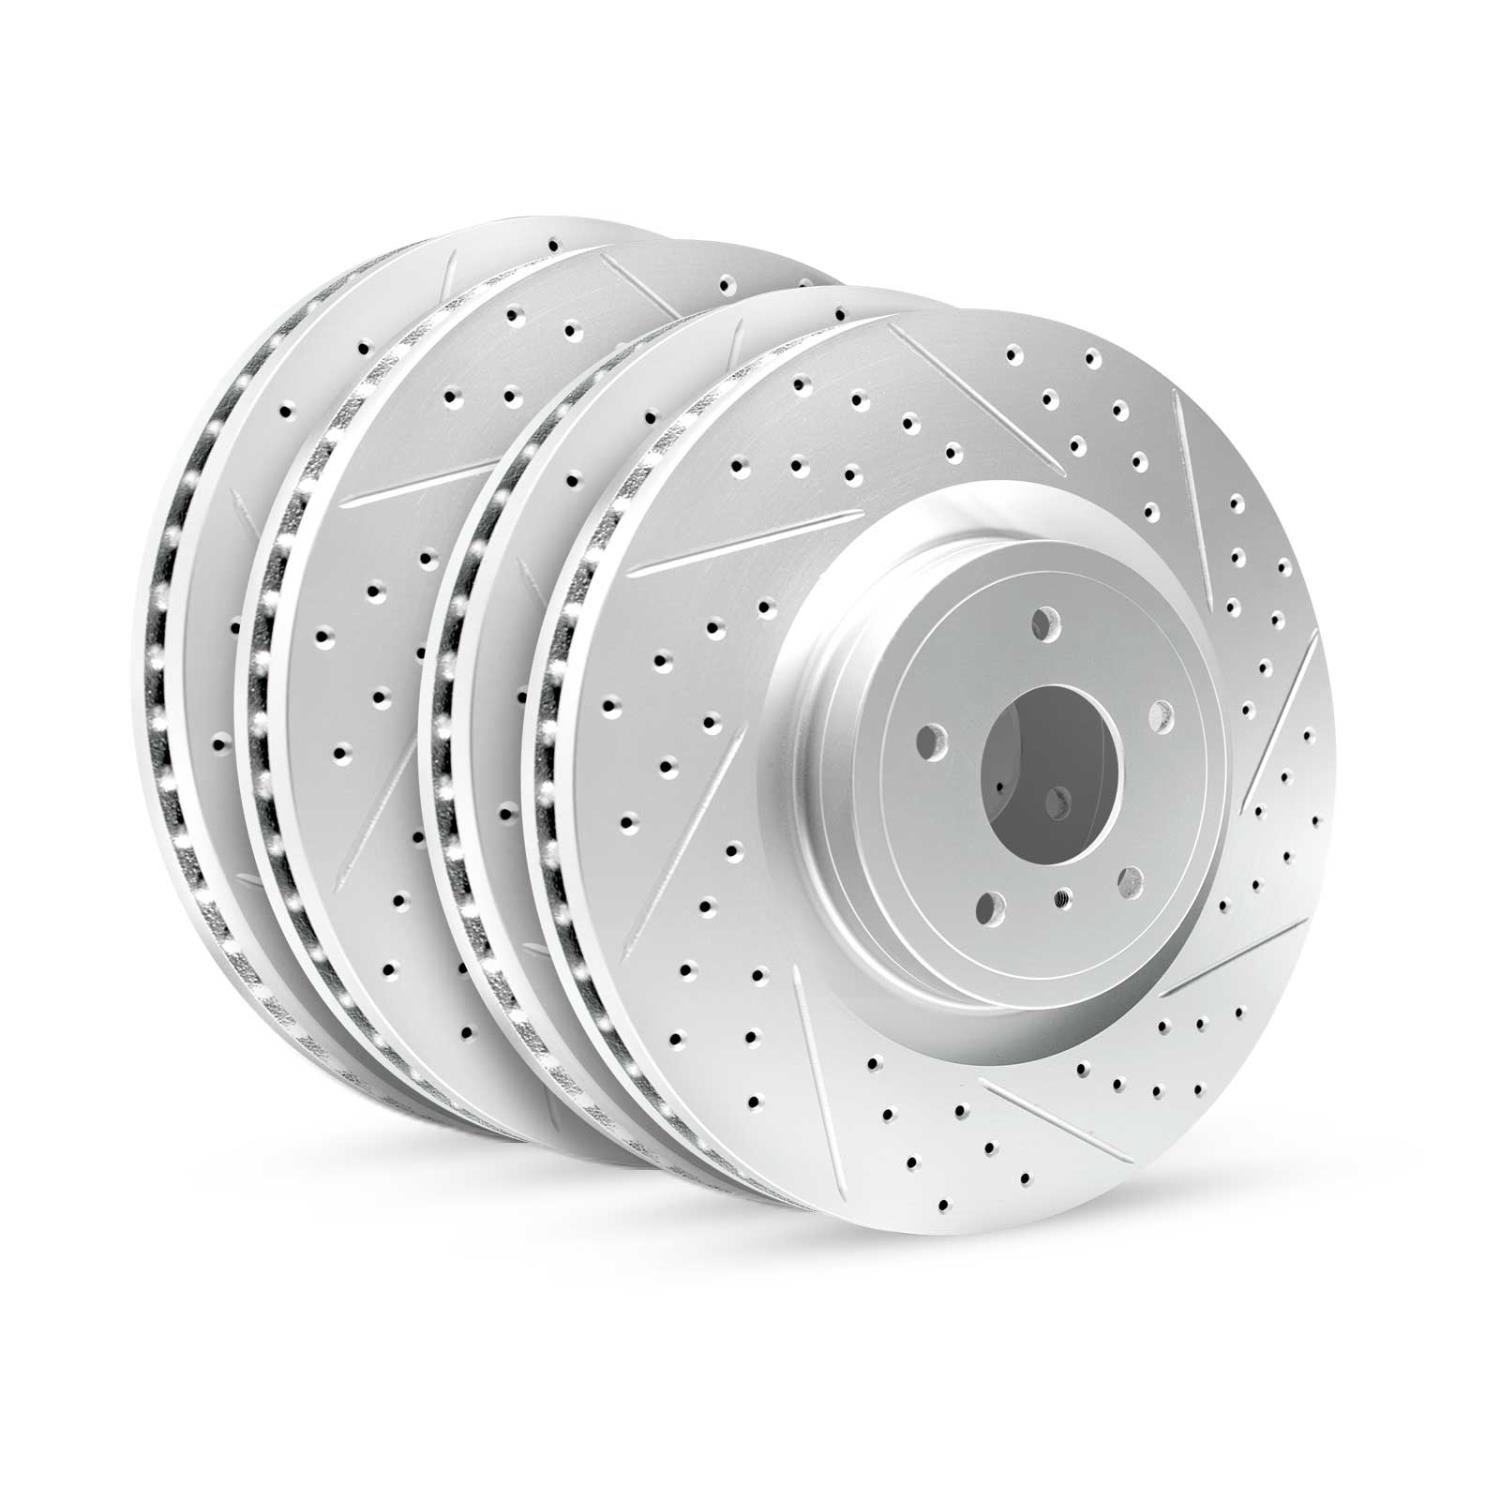 GEO-Carbon Drilled/Slotted Rotors, 1997-2004 Audi/Porsche/Volkswagen, Position: Front/Rear